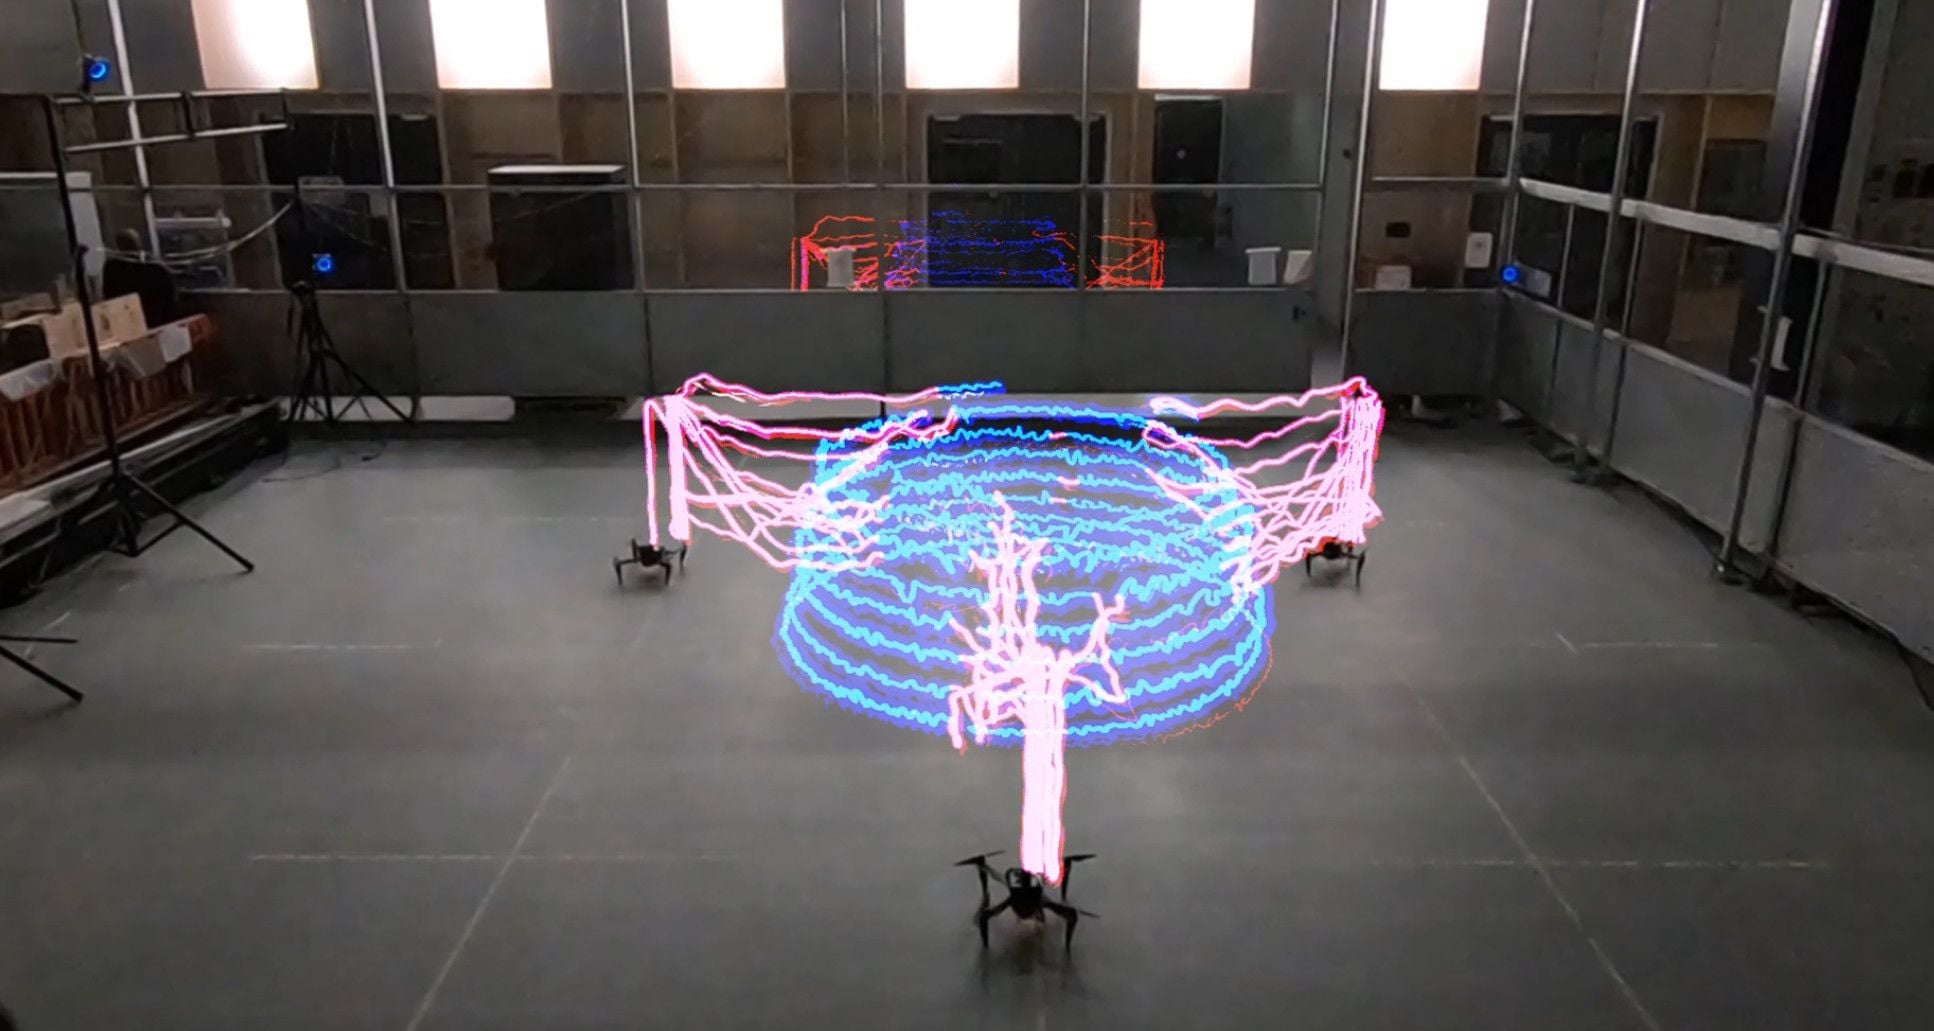 Bee-like 3D printing drones work together to build tower-like structures.